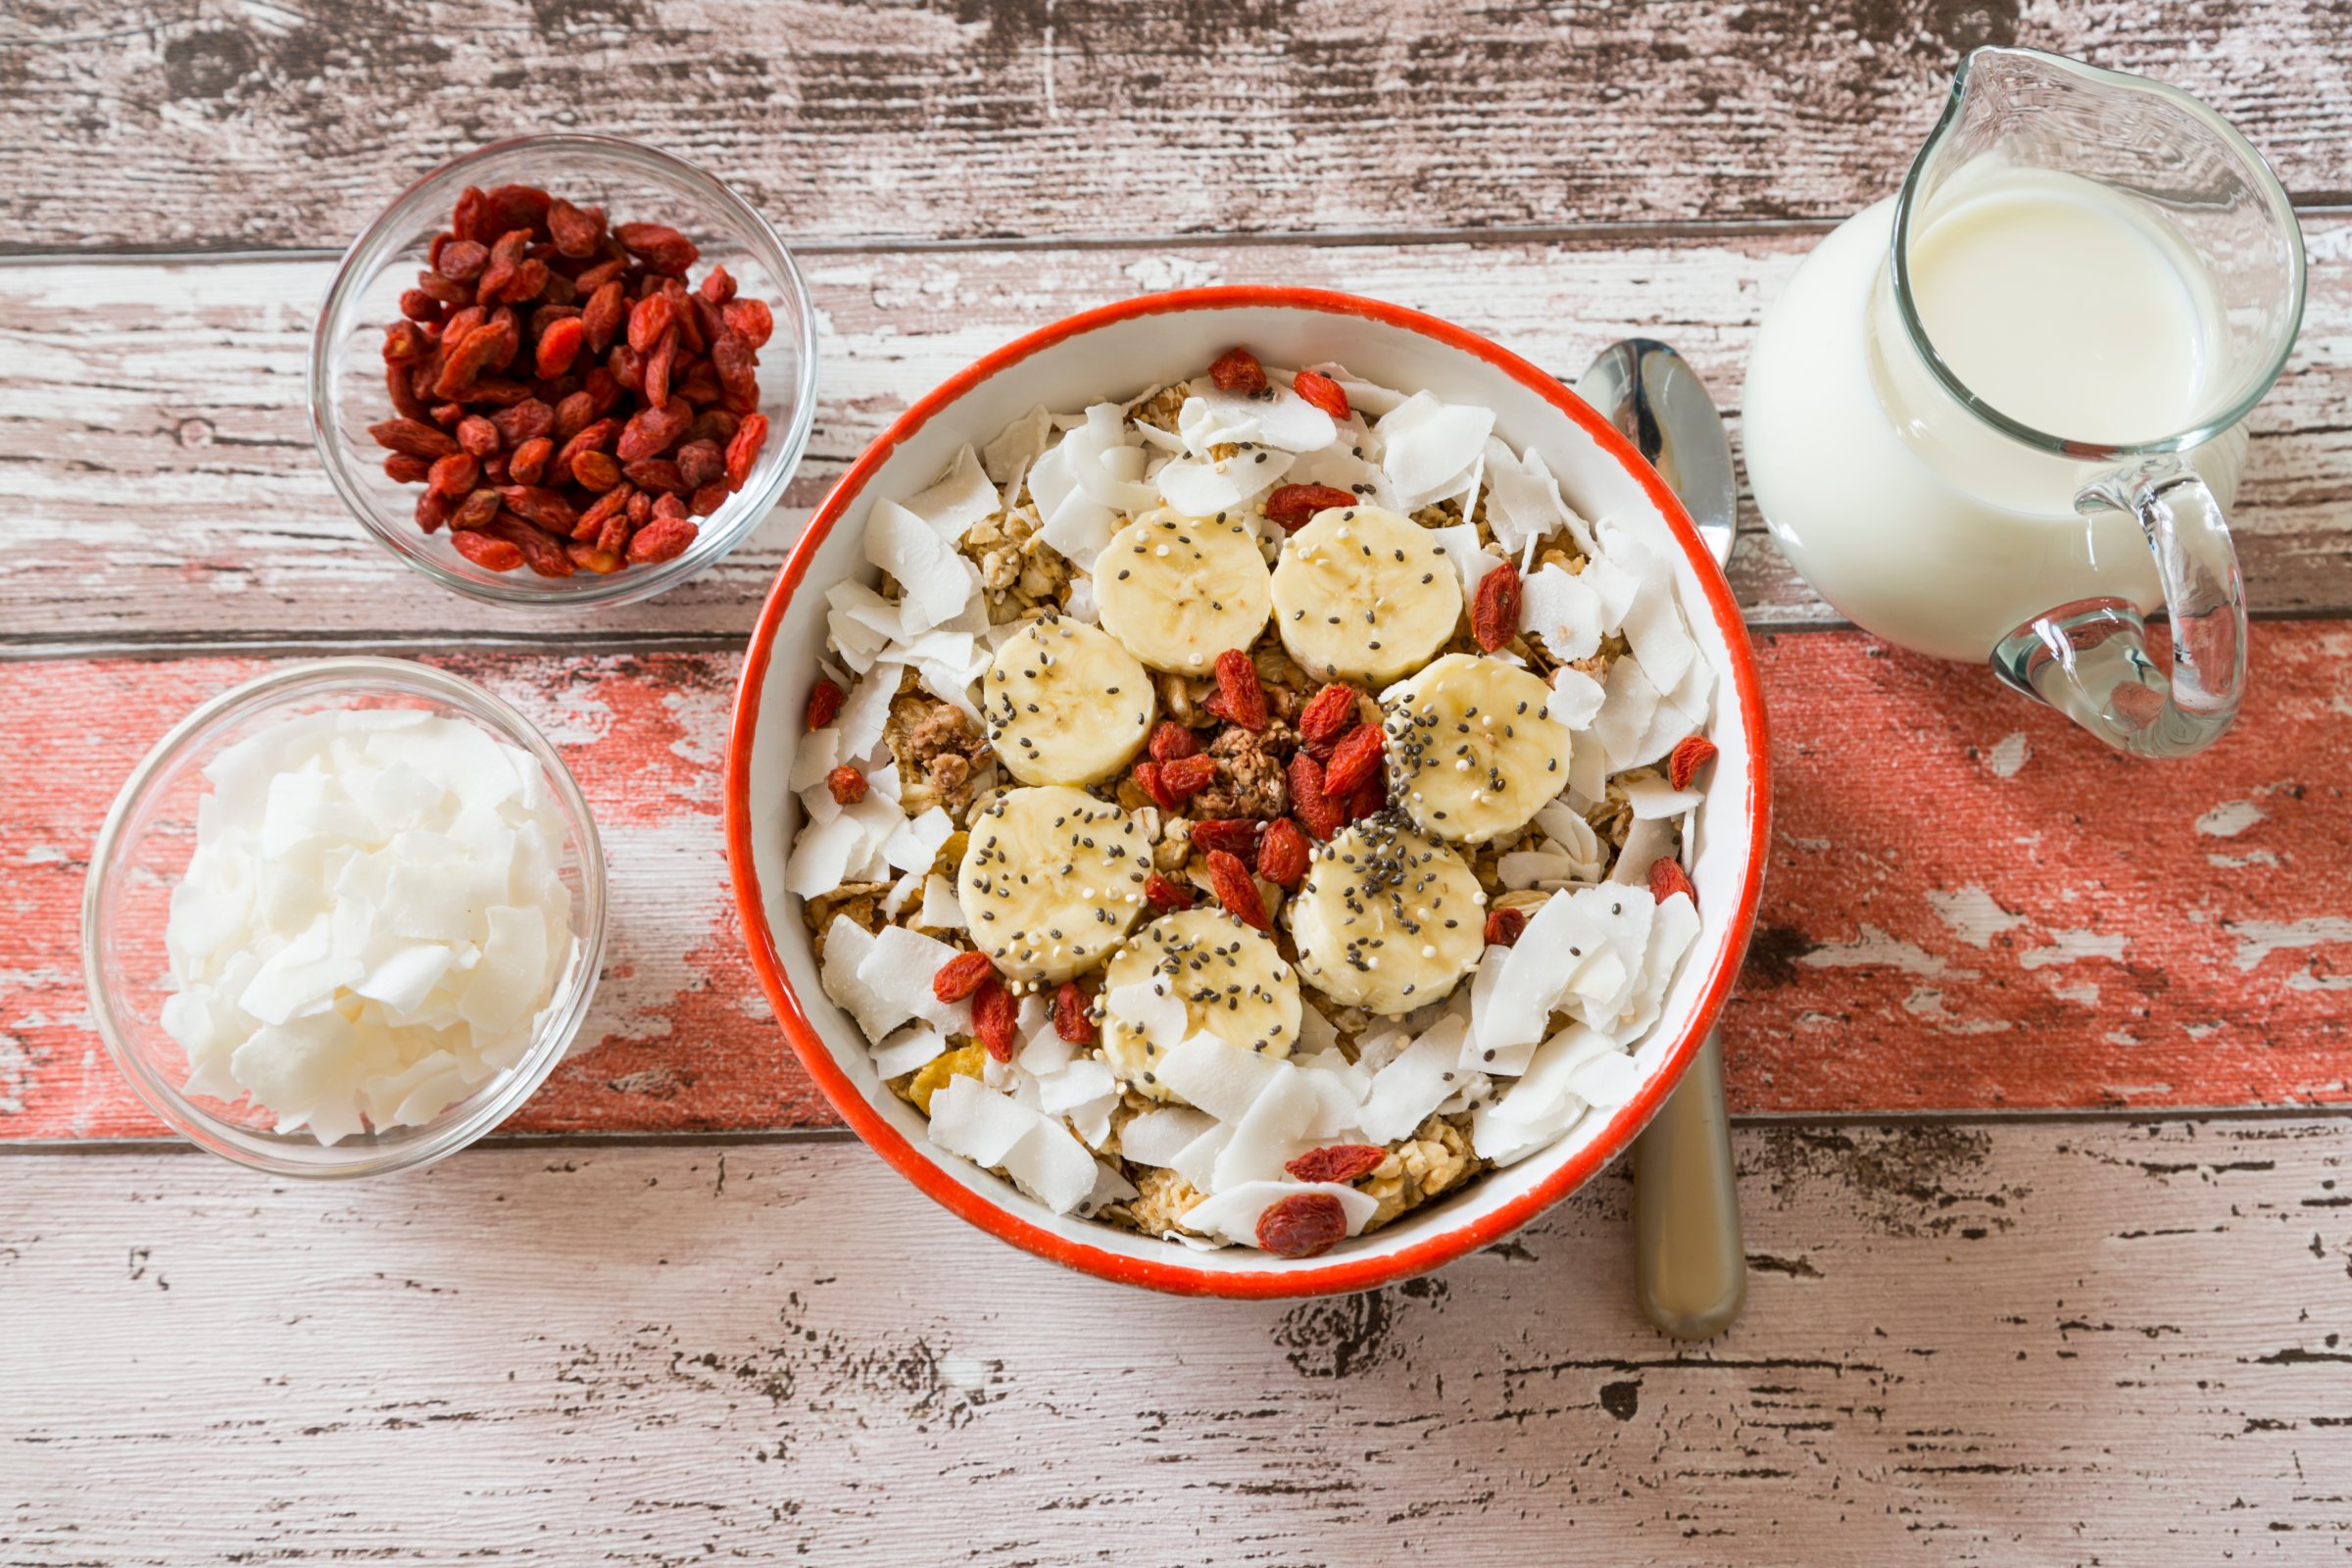 Bowl of muesli with banana slices, chia seeds, coconut chips and goji berries